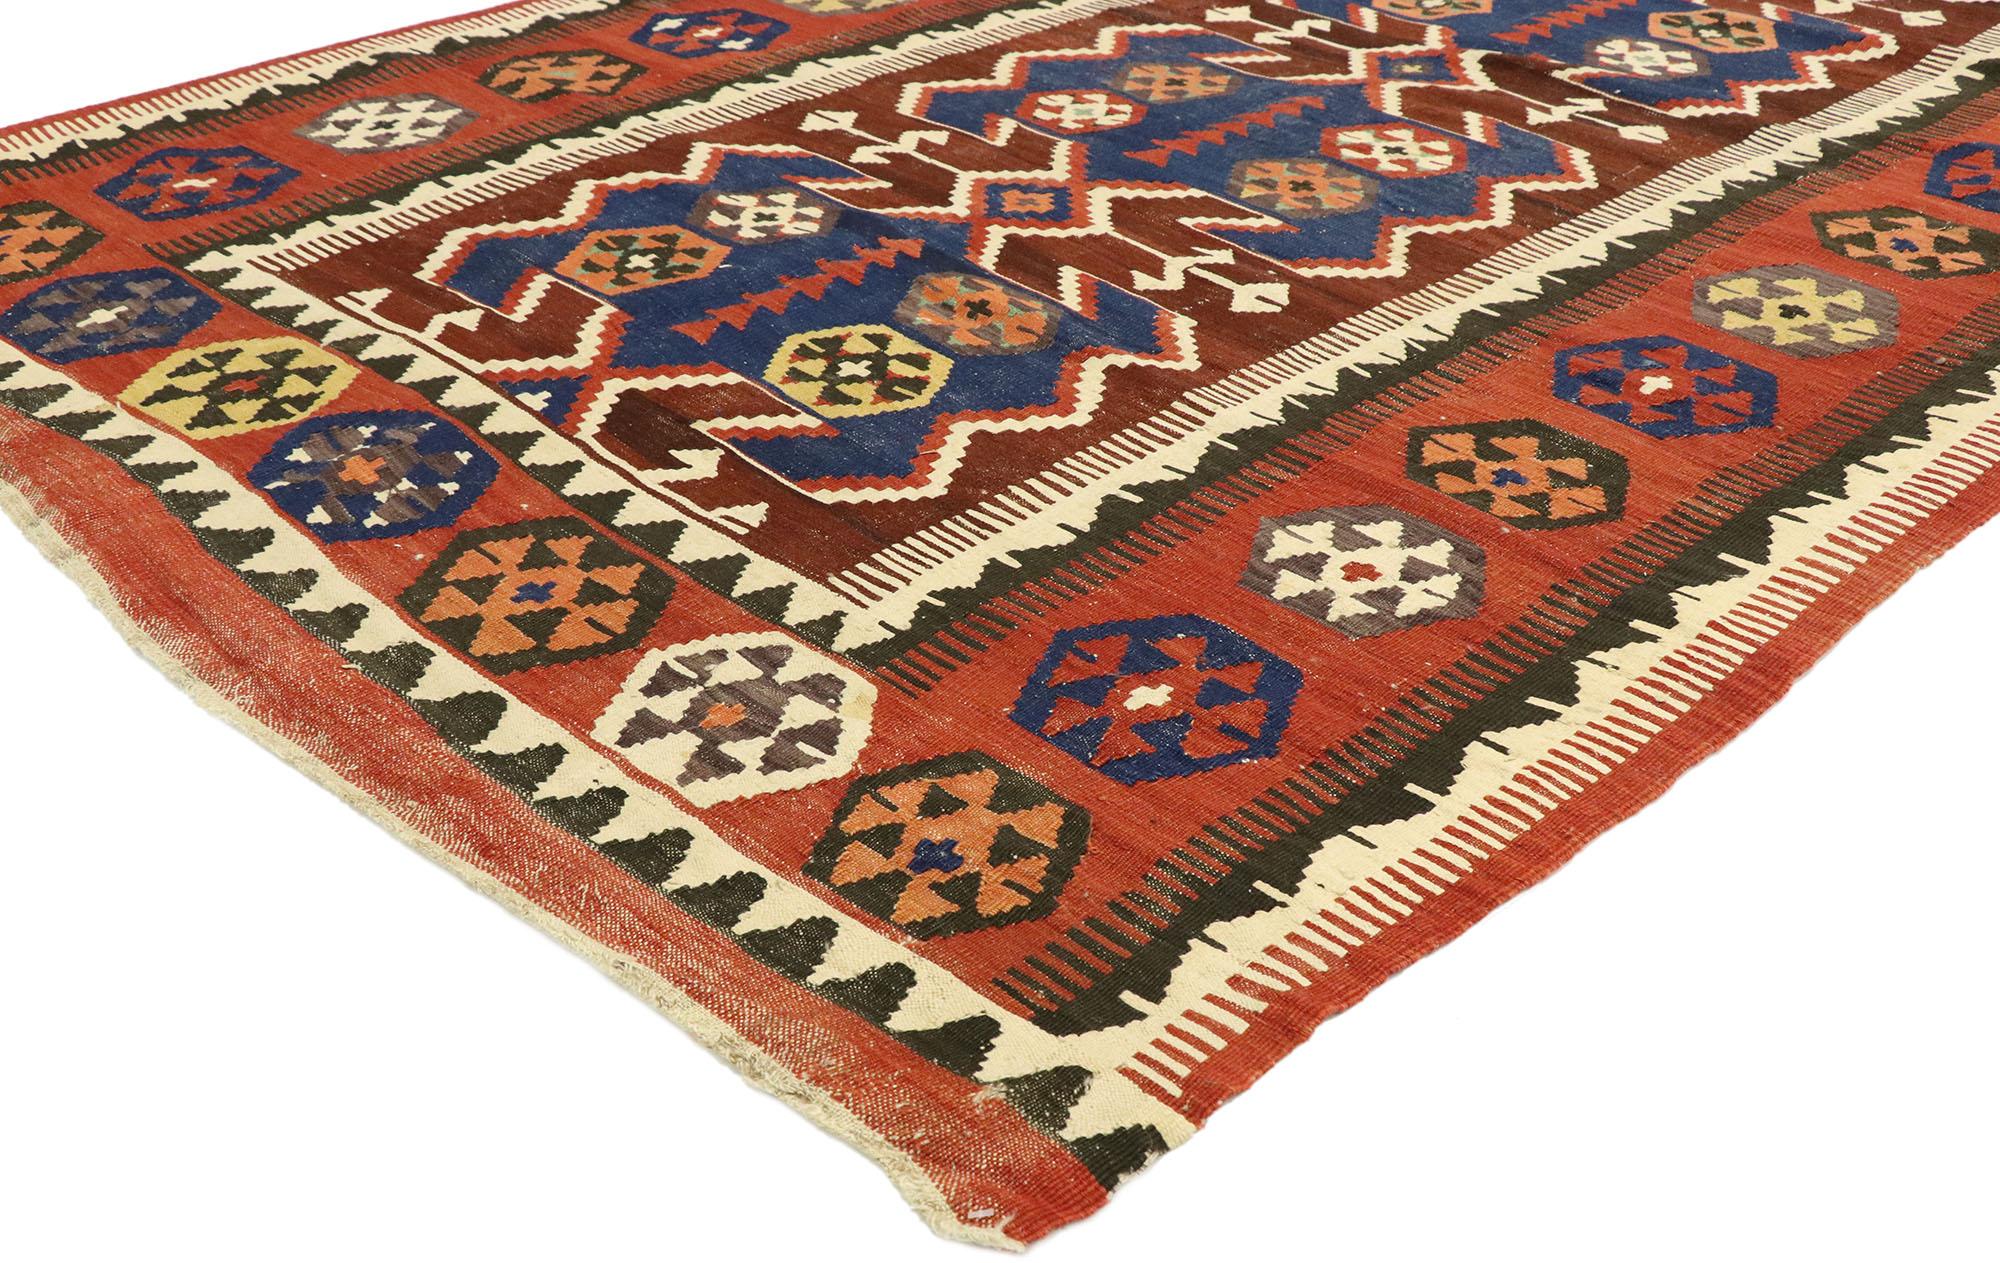 74948, vintage Persian Kilim Gallery rug with Modern Rustic Adirondack Tribal style. With its bold expressive design, incredible detail and texture, this handwoven wool vintage Persian Kilim rug is a captivating vision of woven beauty highlighting